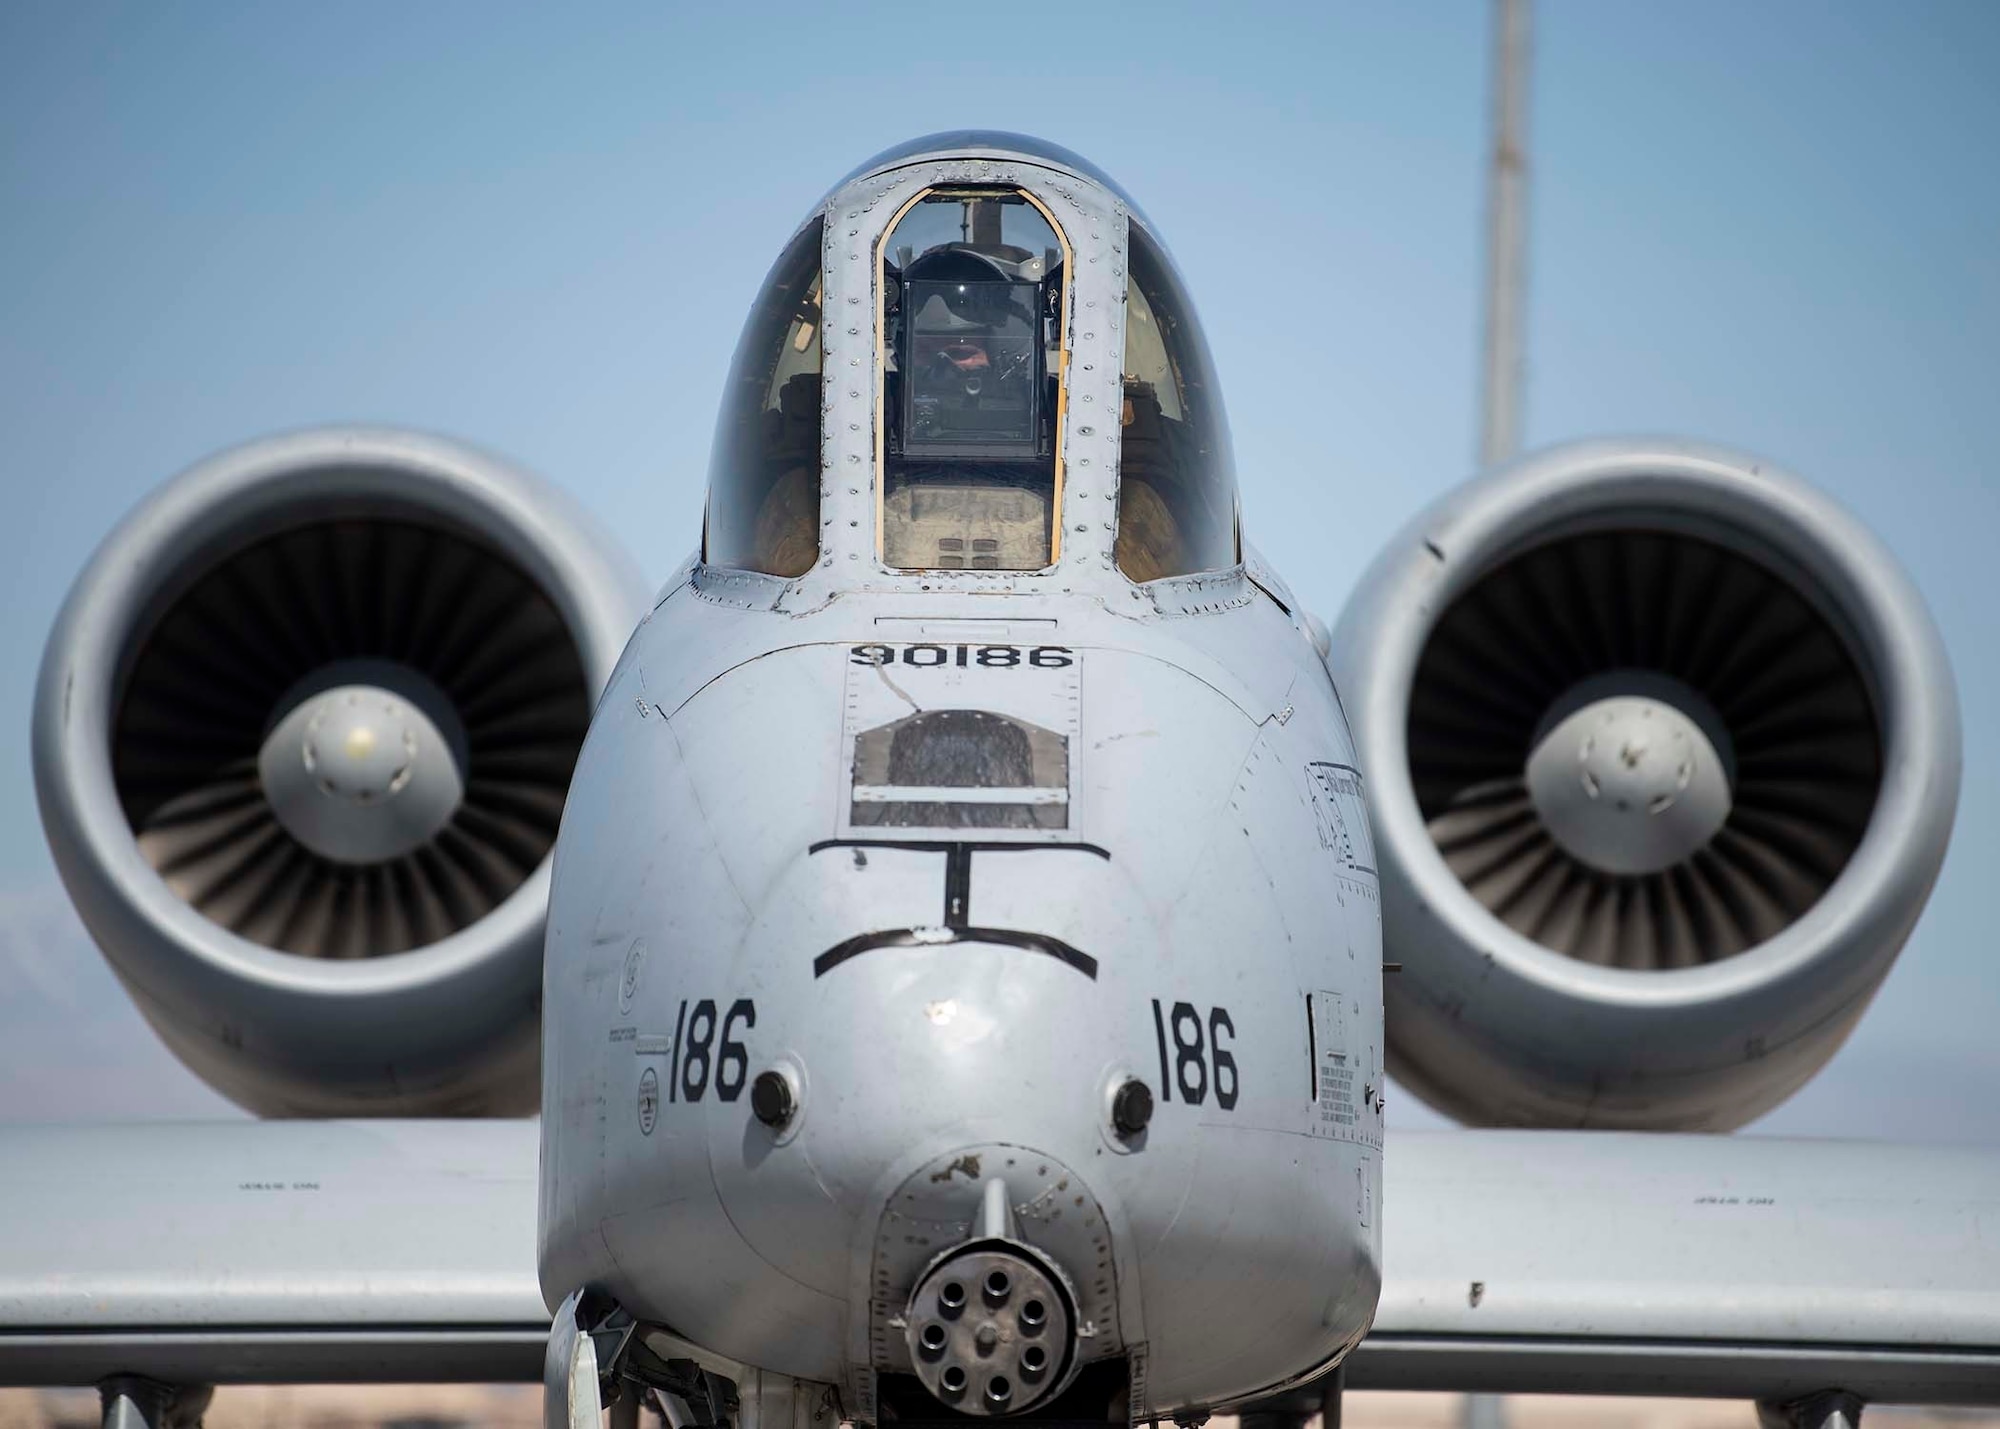 Lt. Col. James Kappes, 6th Combat Training Squadron director of operations, prepares to launch from Nellis Air Force Base, Nev., June 21, 2019. The A-10 Thunderbolt II has excellent maneuverability at low air speeds and altitude, and is a highly accurate and survivable weapons-delivery platform. (U.S. Air Force photo by Airman 1st Class Bryan Guthrie)